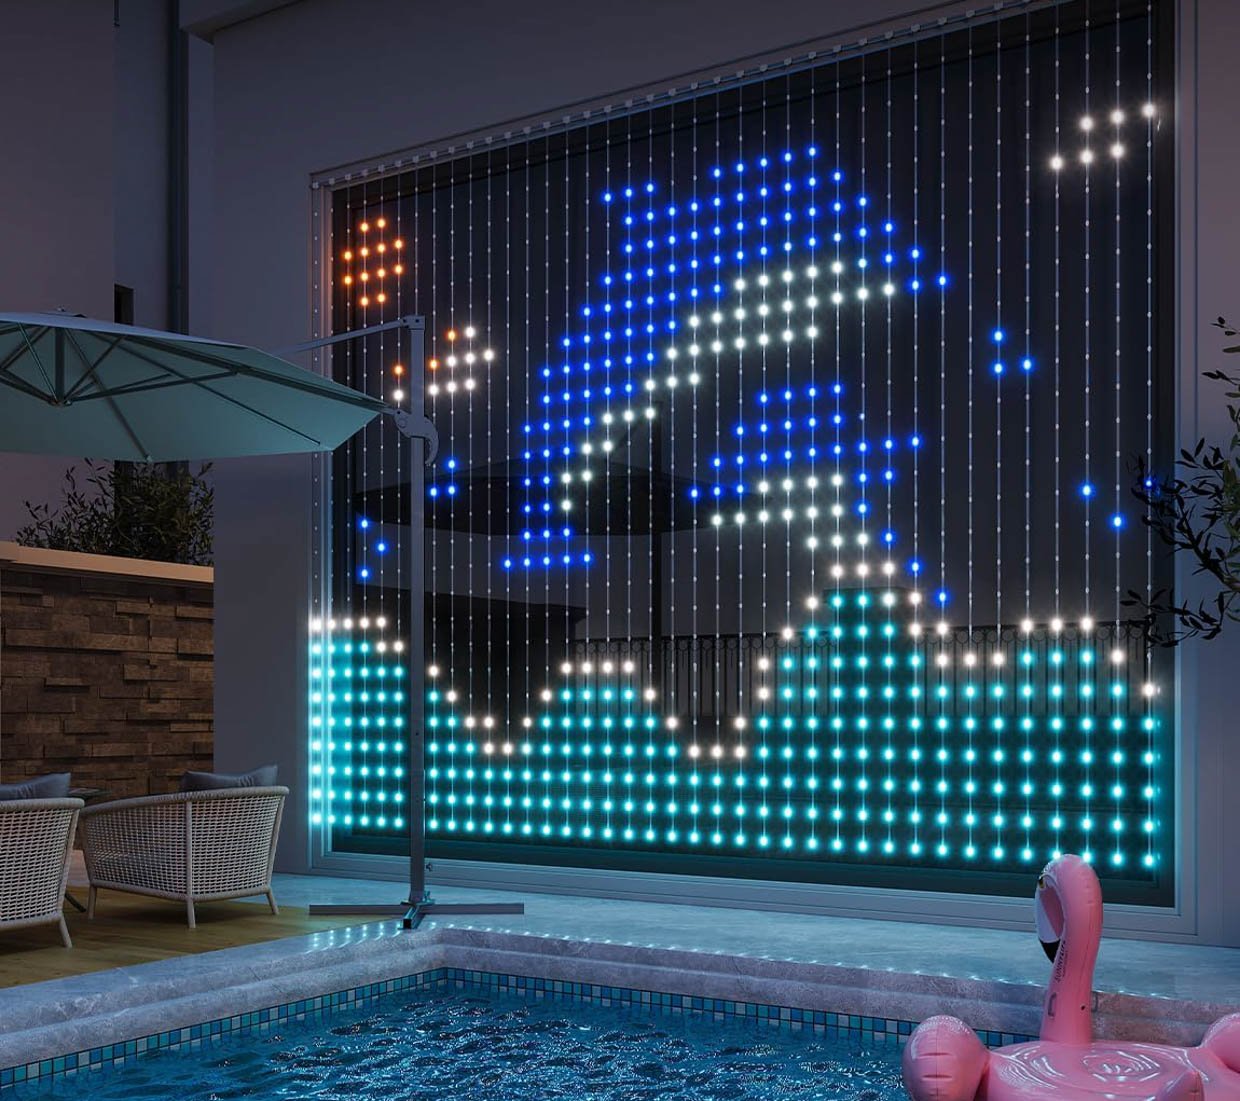 Govee LED Curtain Lights Illuminate Your House with Pixel Art and Animated  GIFs